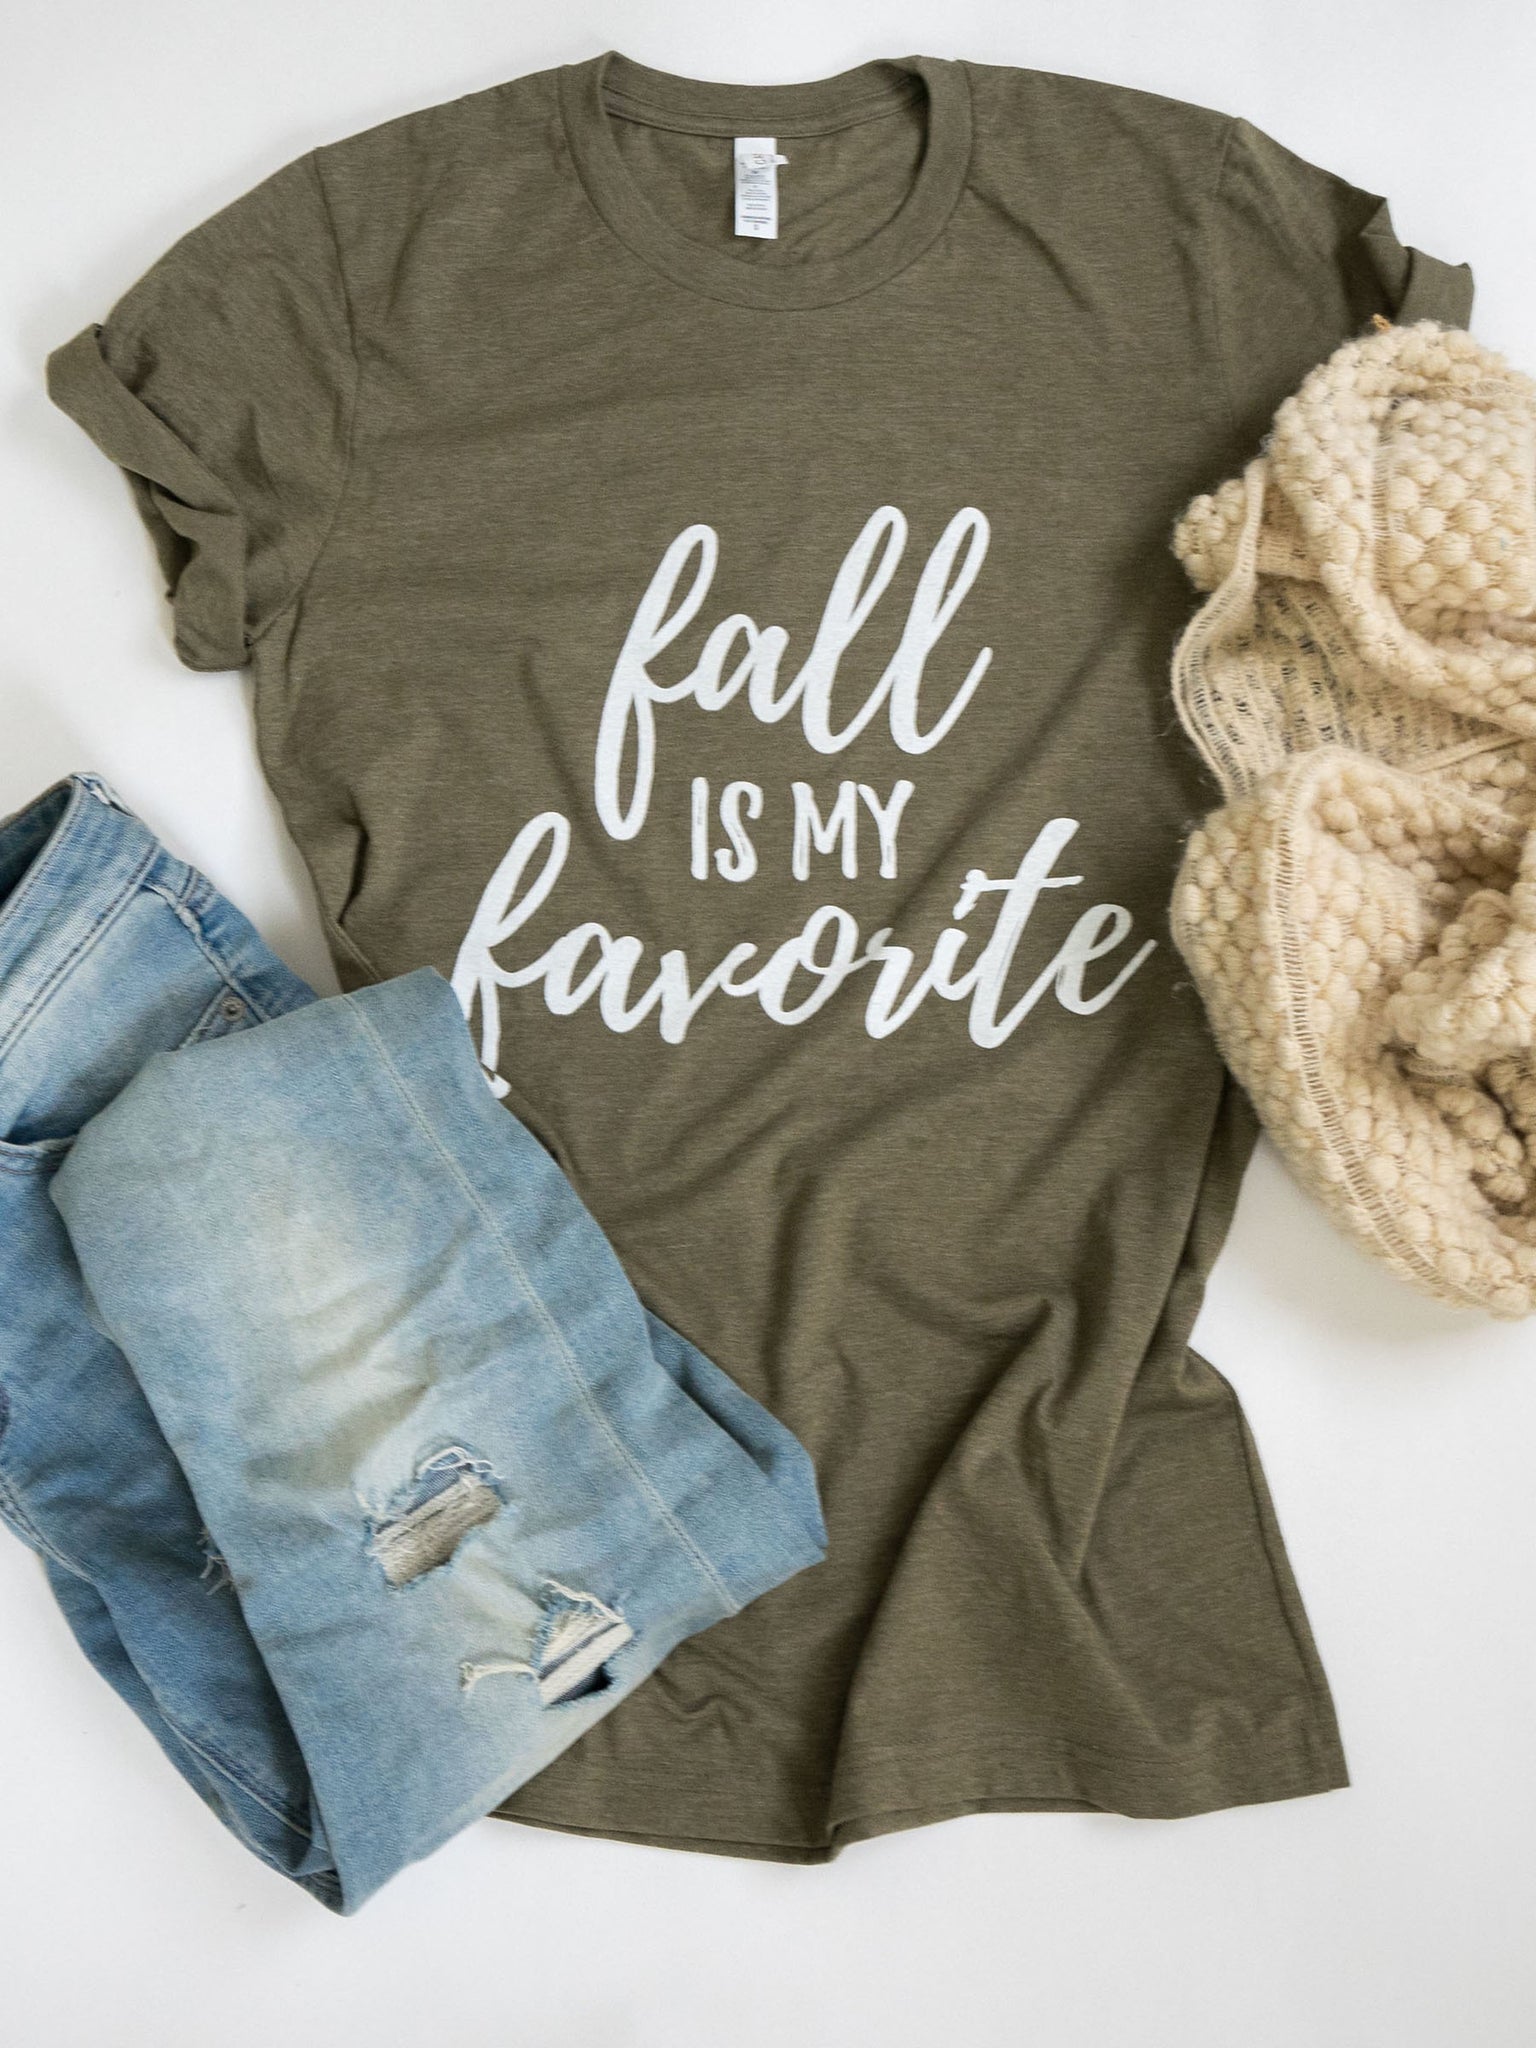 Fall is my Favorite-Fall-Colors-Graphic Tee-Apparel-Womens-Holiday-Fall Time-Favorite-Unisex fit-Mens-Fall-Olive Green-Green-Olive-Favorite-Pumpkin-Spice